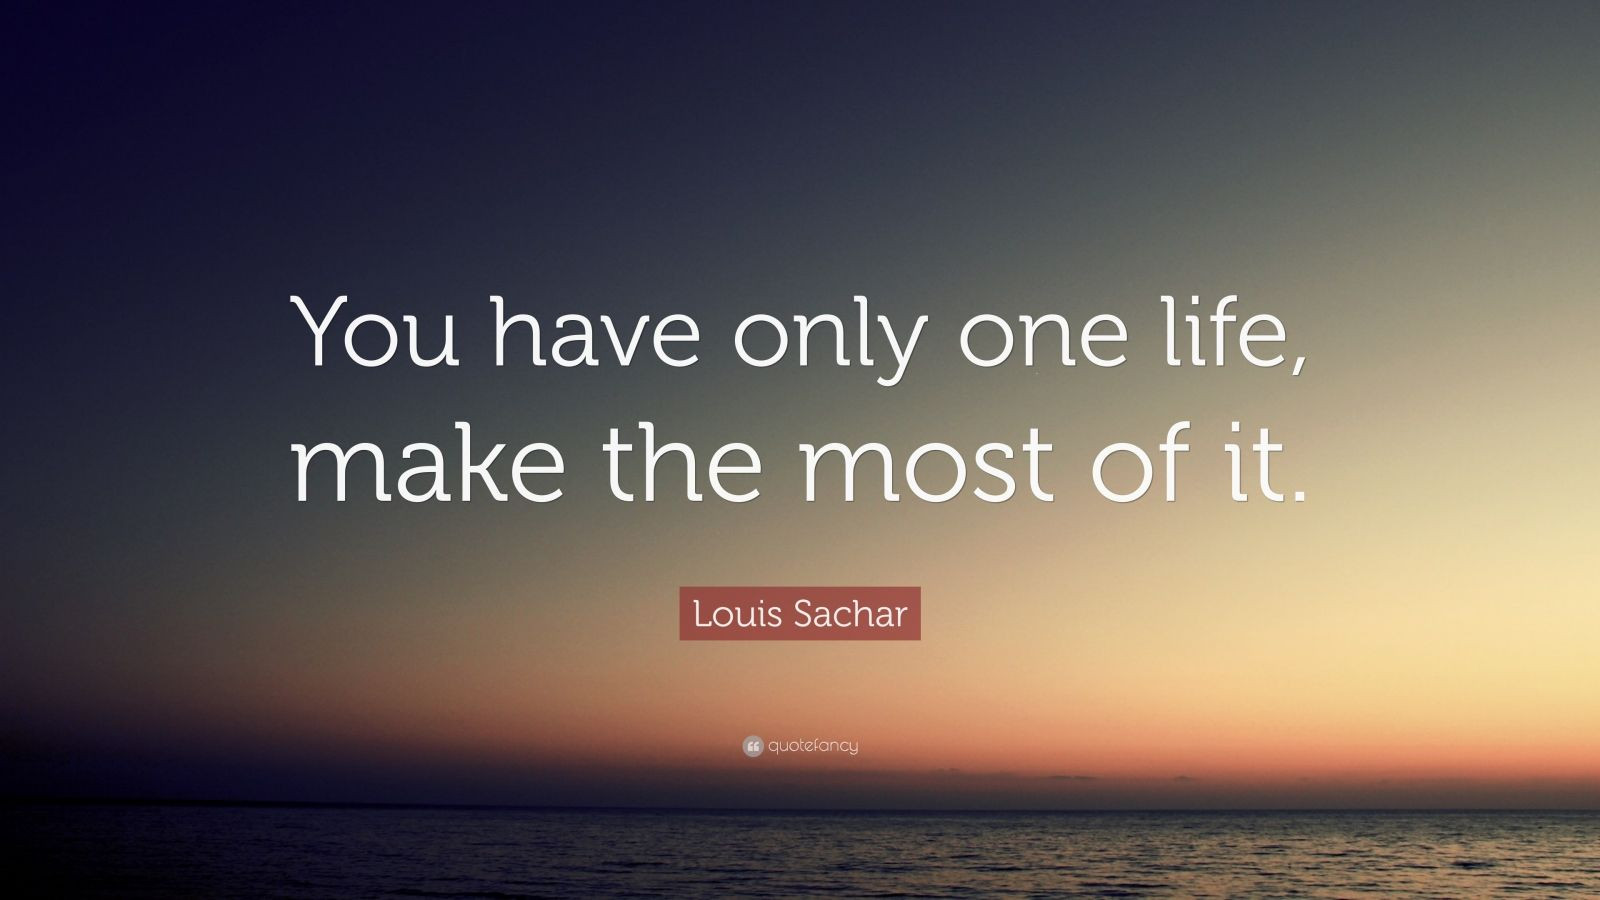 One Life Quotes
 Louis Sachar Quote “You have only one life make the most